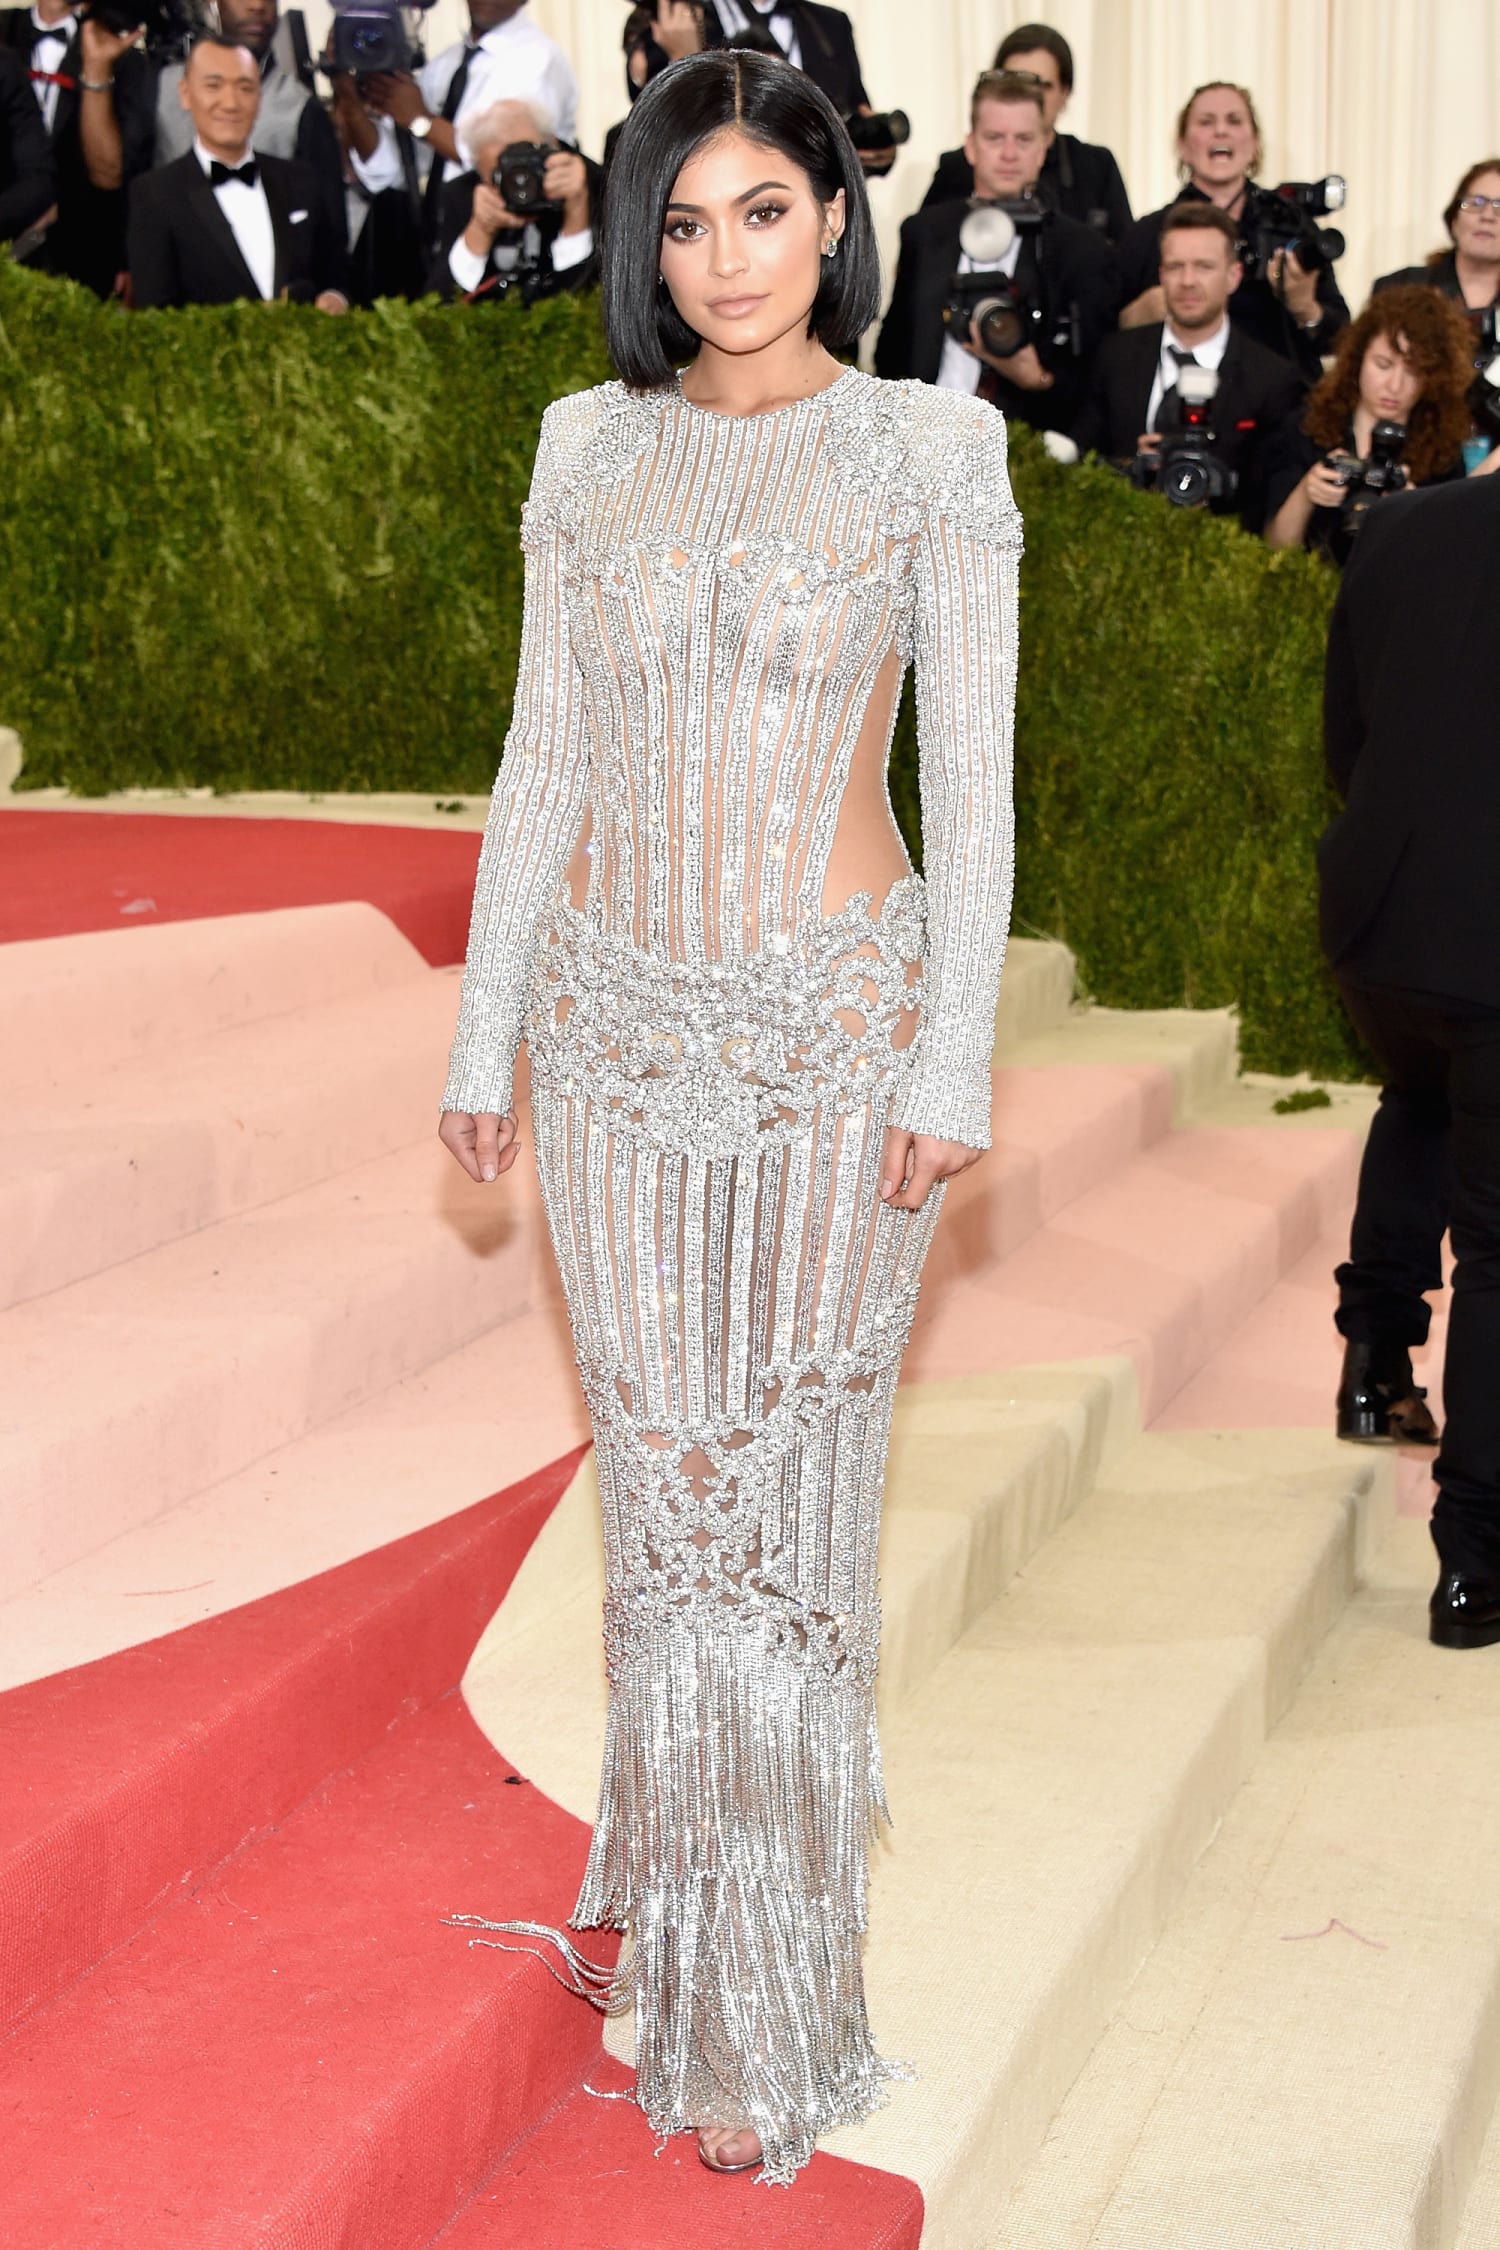 Every Look The Kardashian-Jenners Have Worn To The Met Gala